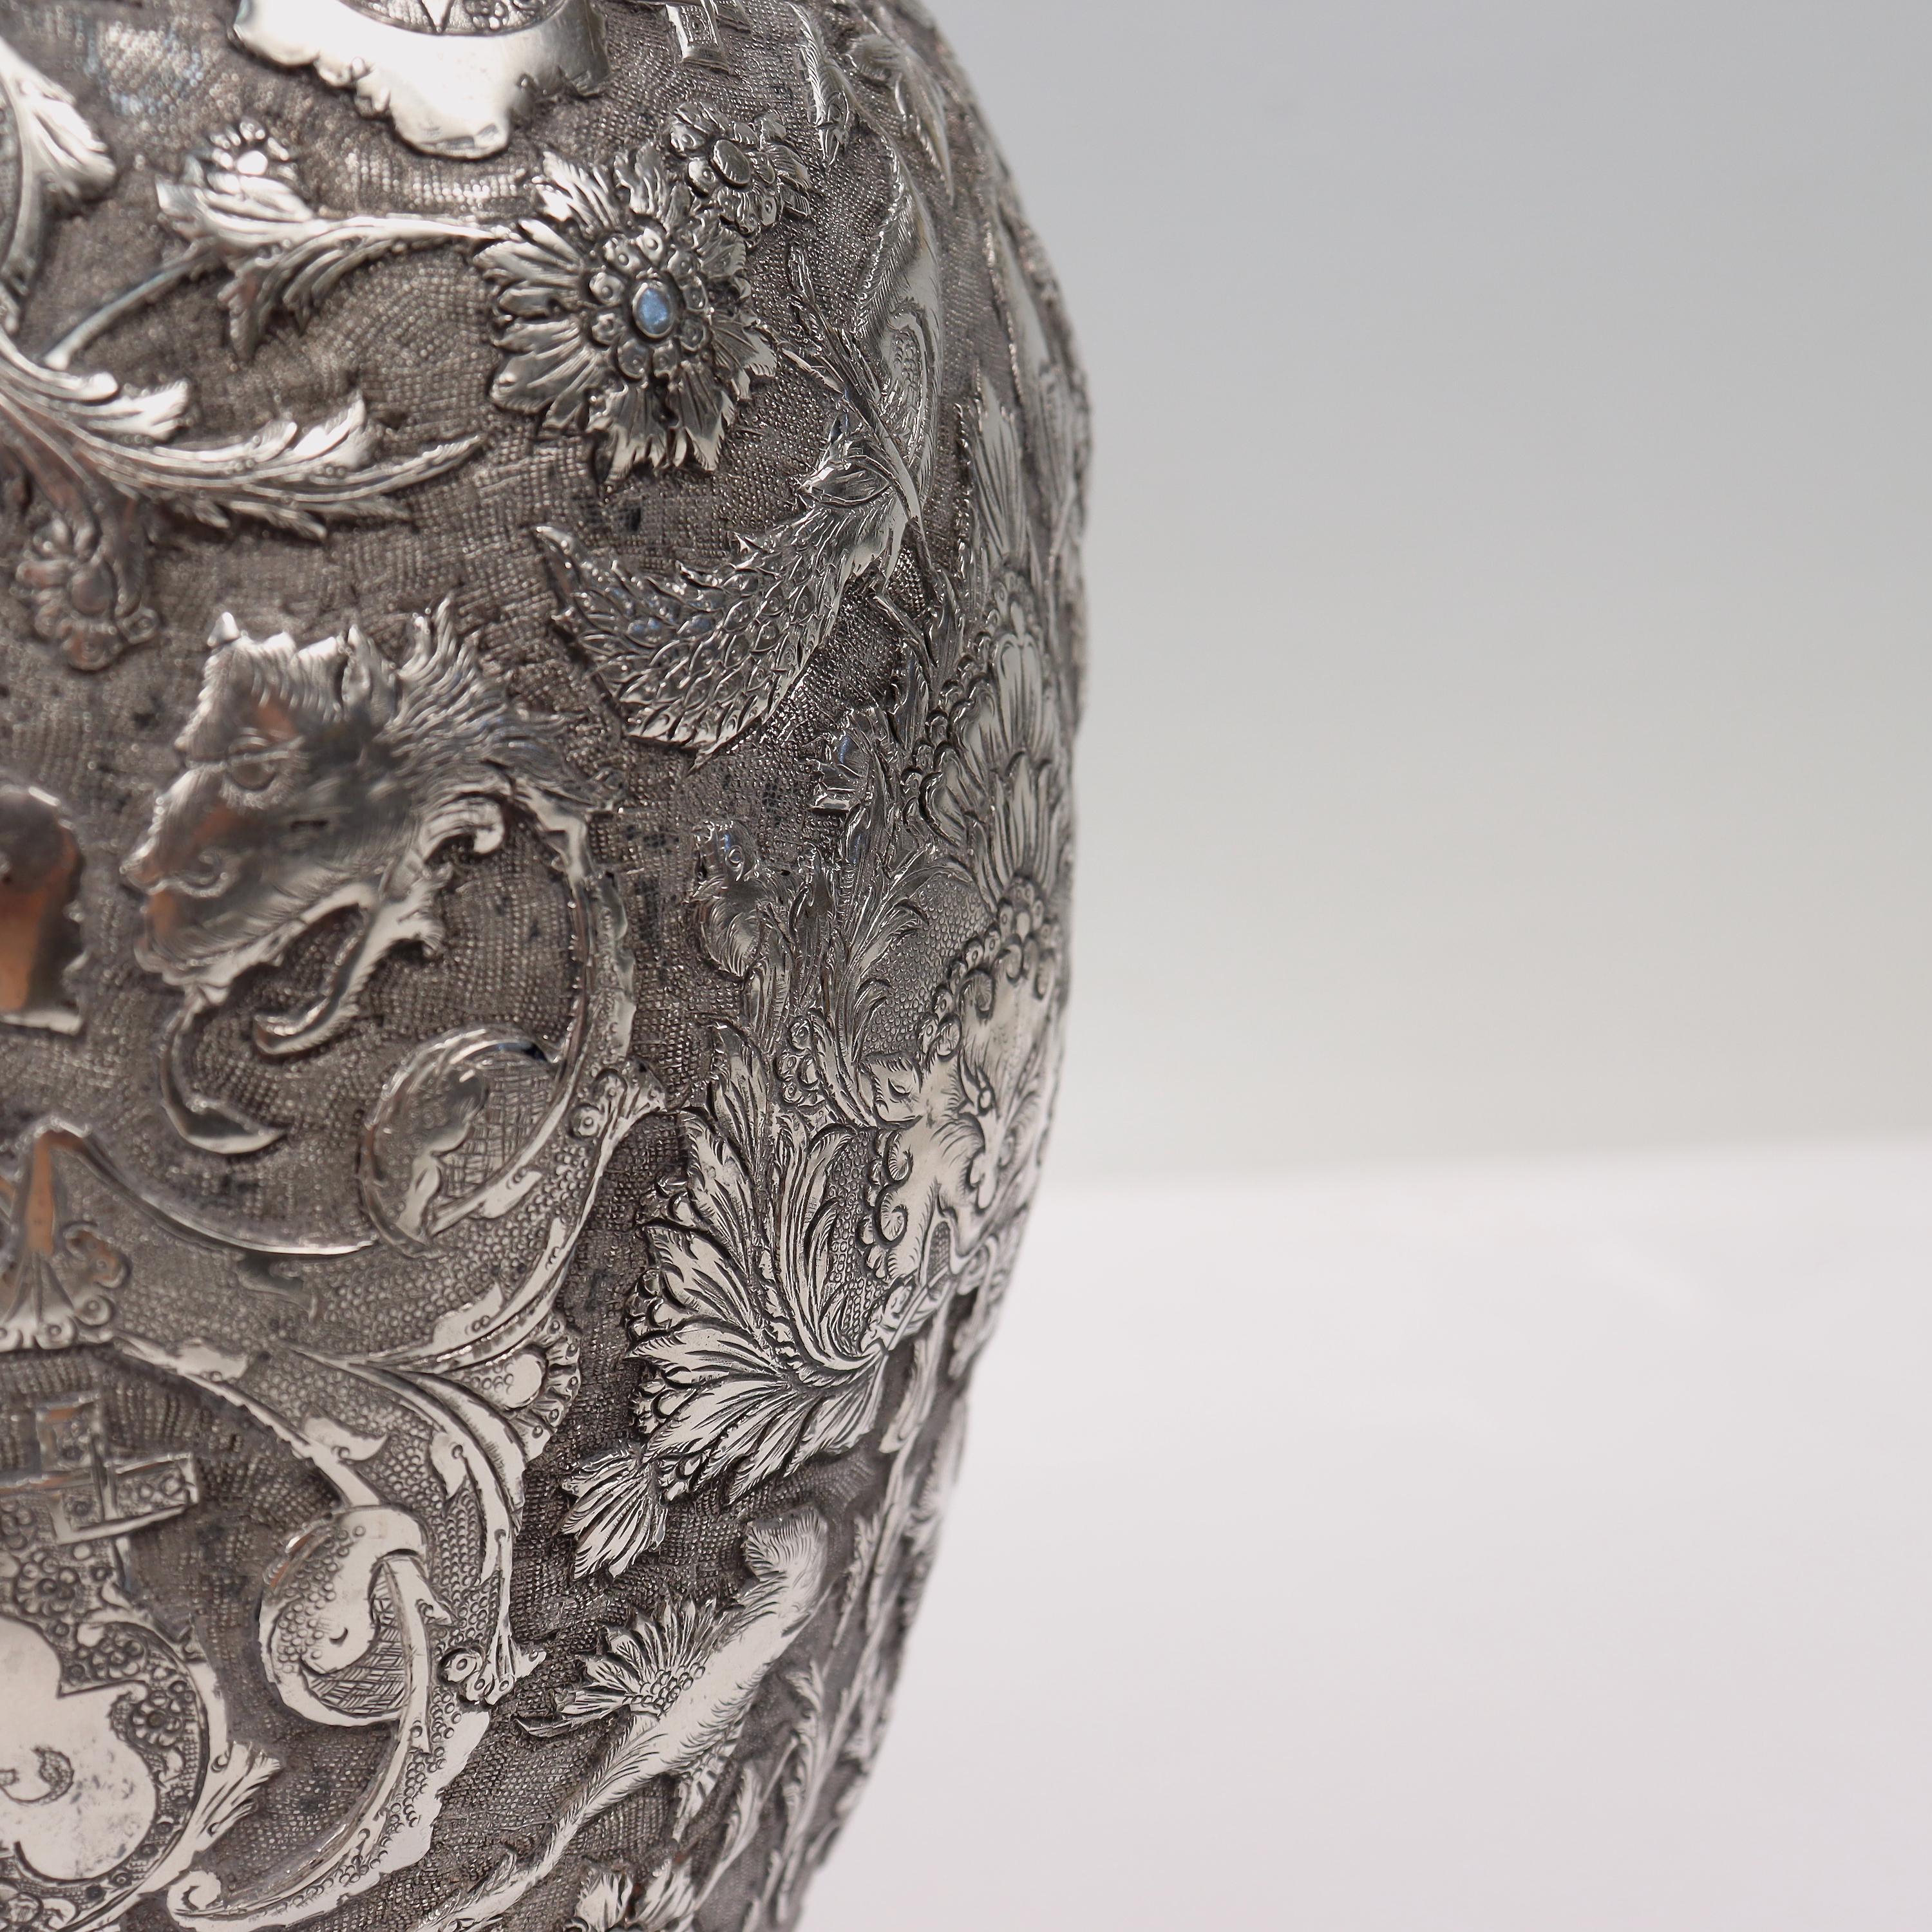 Old or Antique Signed Islamic Ottoman or Persian Repousse Silver Vase For Sale 9